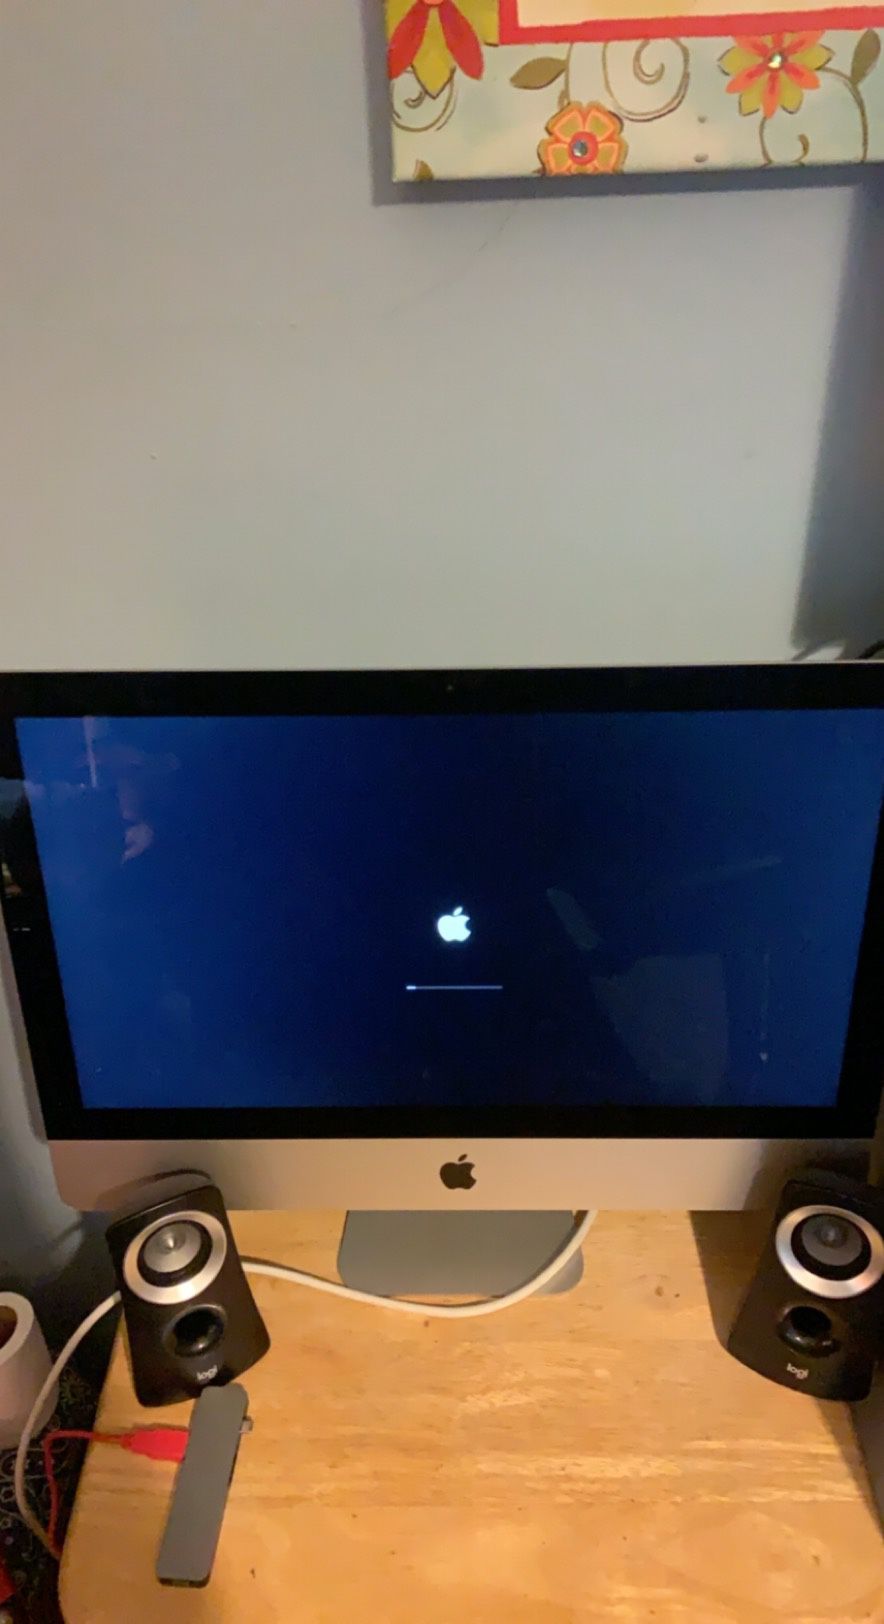 iMac (21.5-Inch, Late 2015) - Price Negotiable